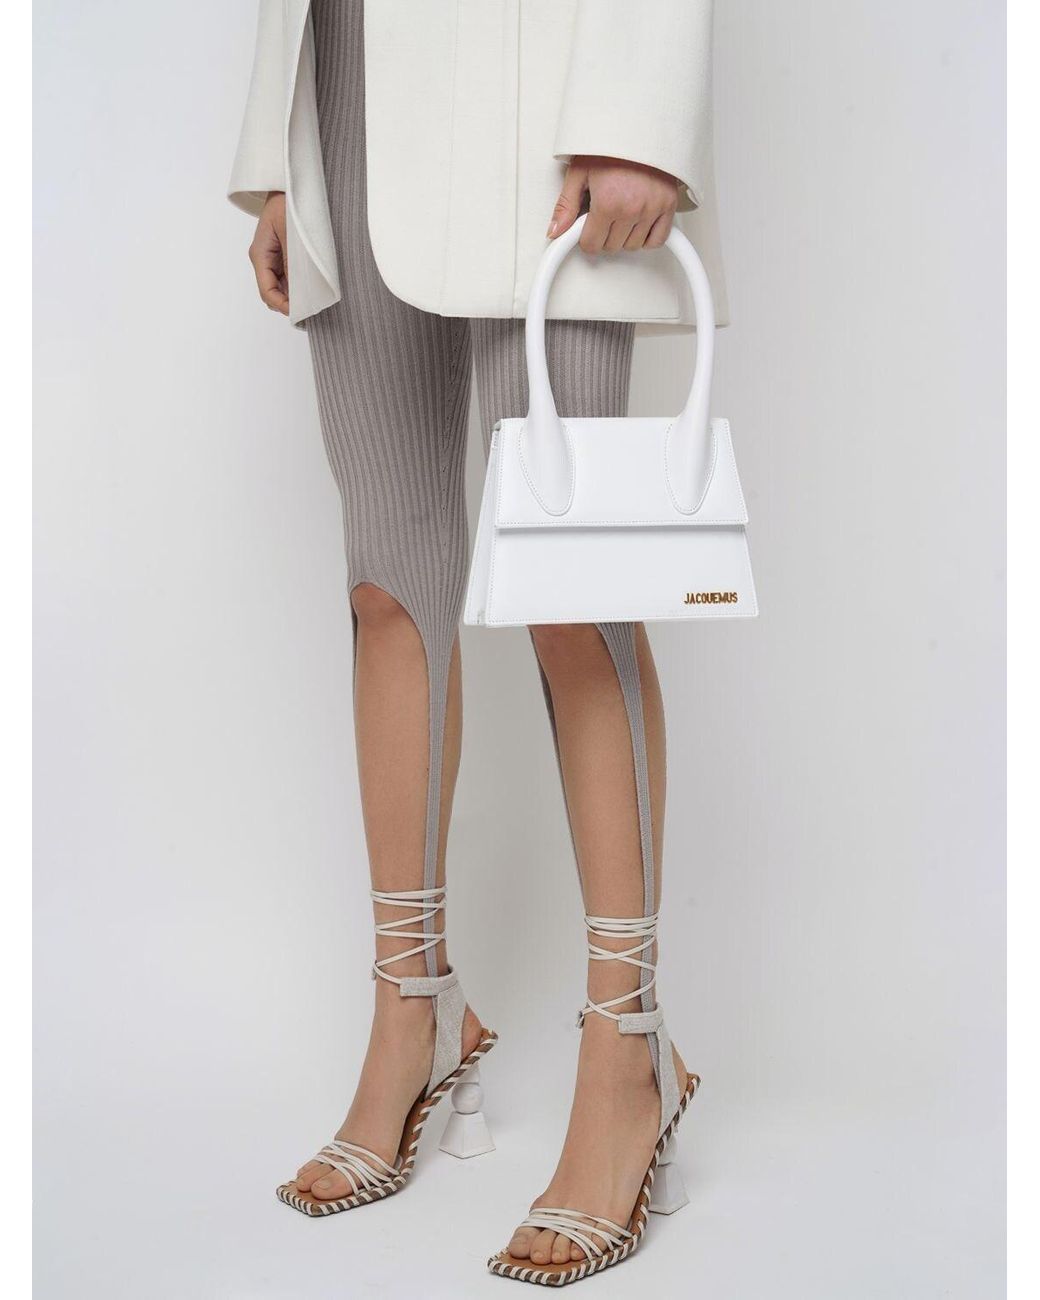 Jacquemus Le Grand Chiquito Leather Top Handle Bag in White